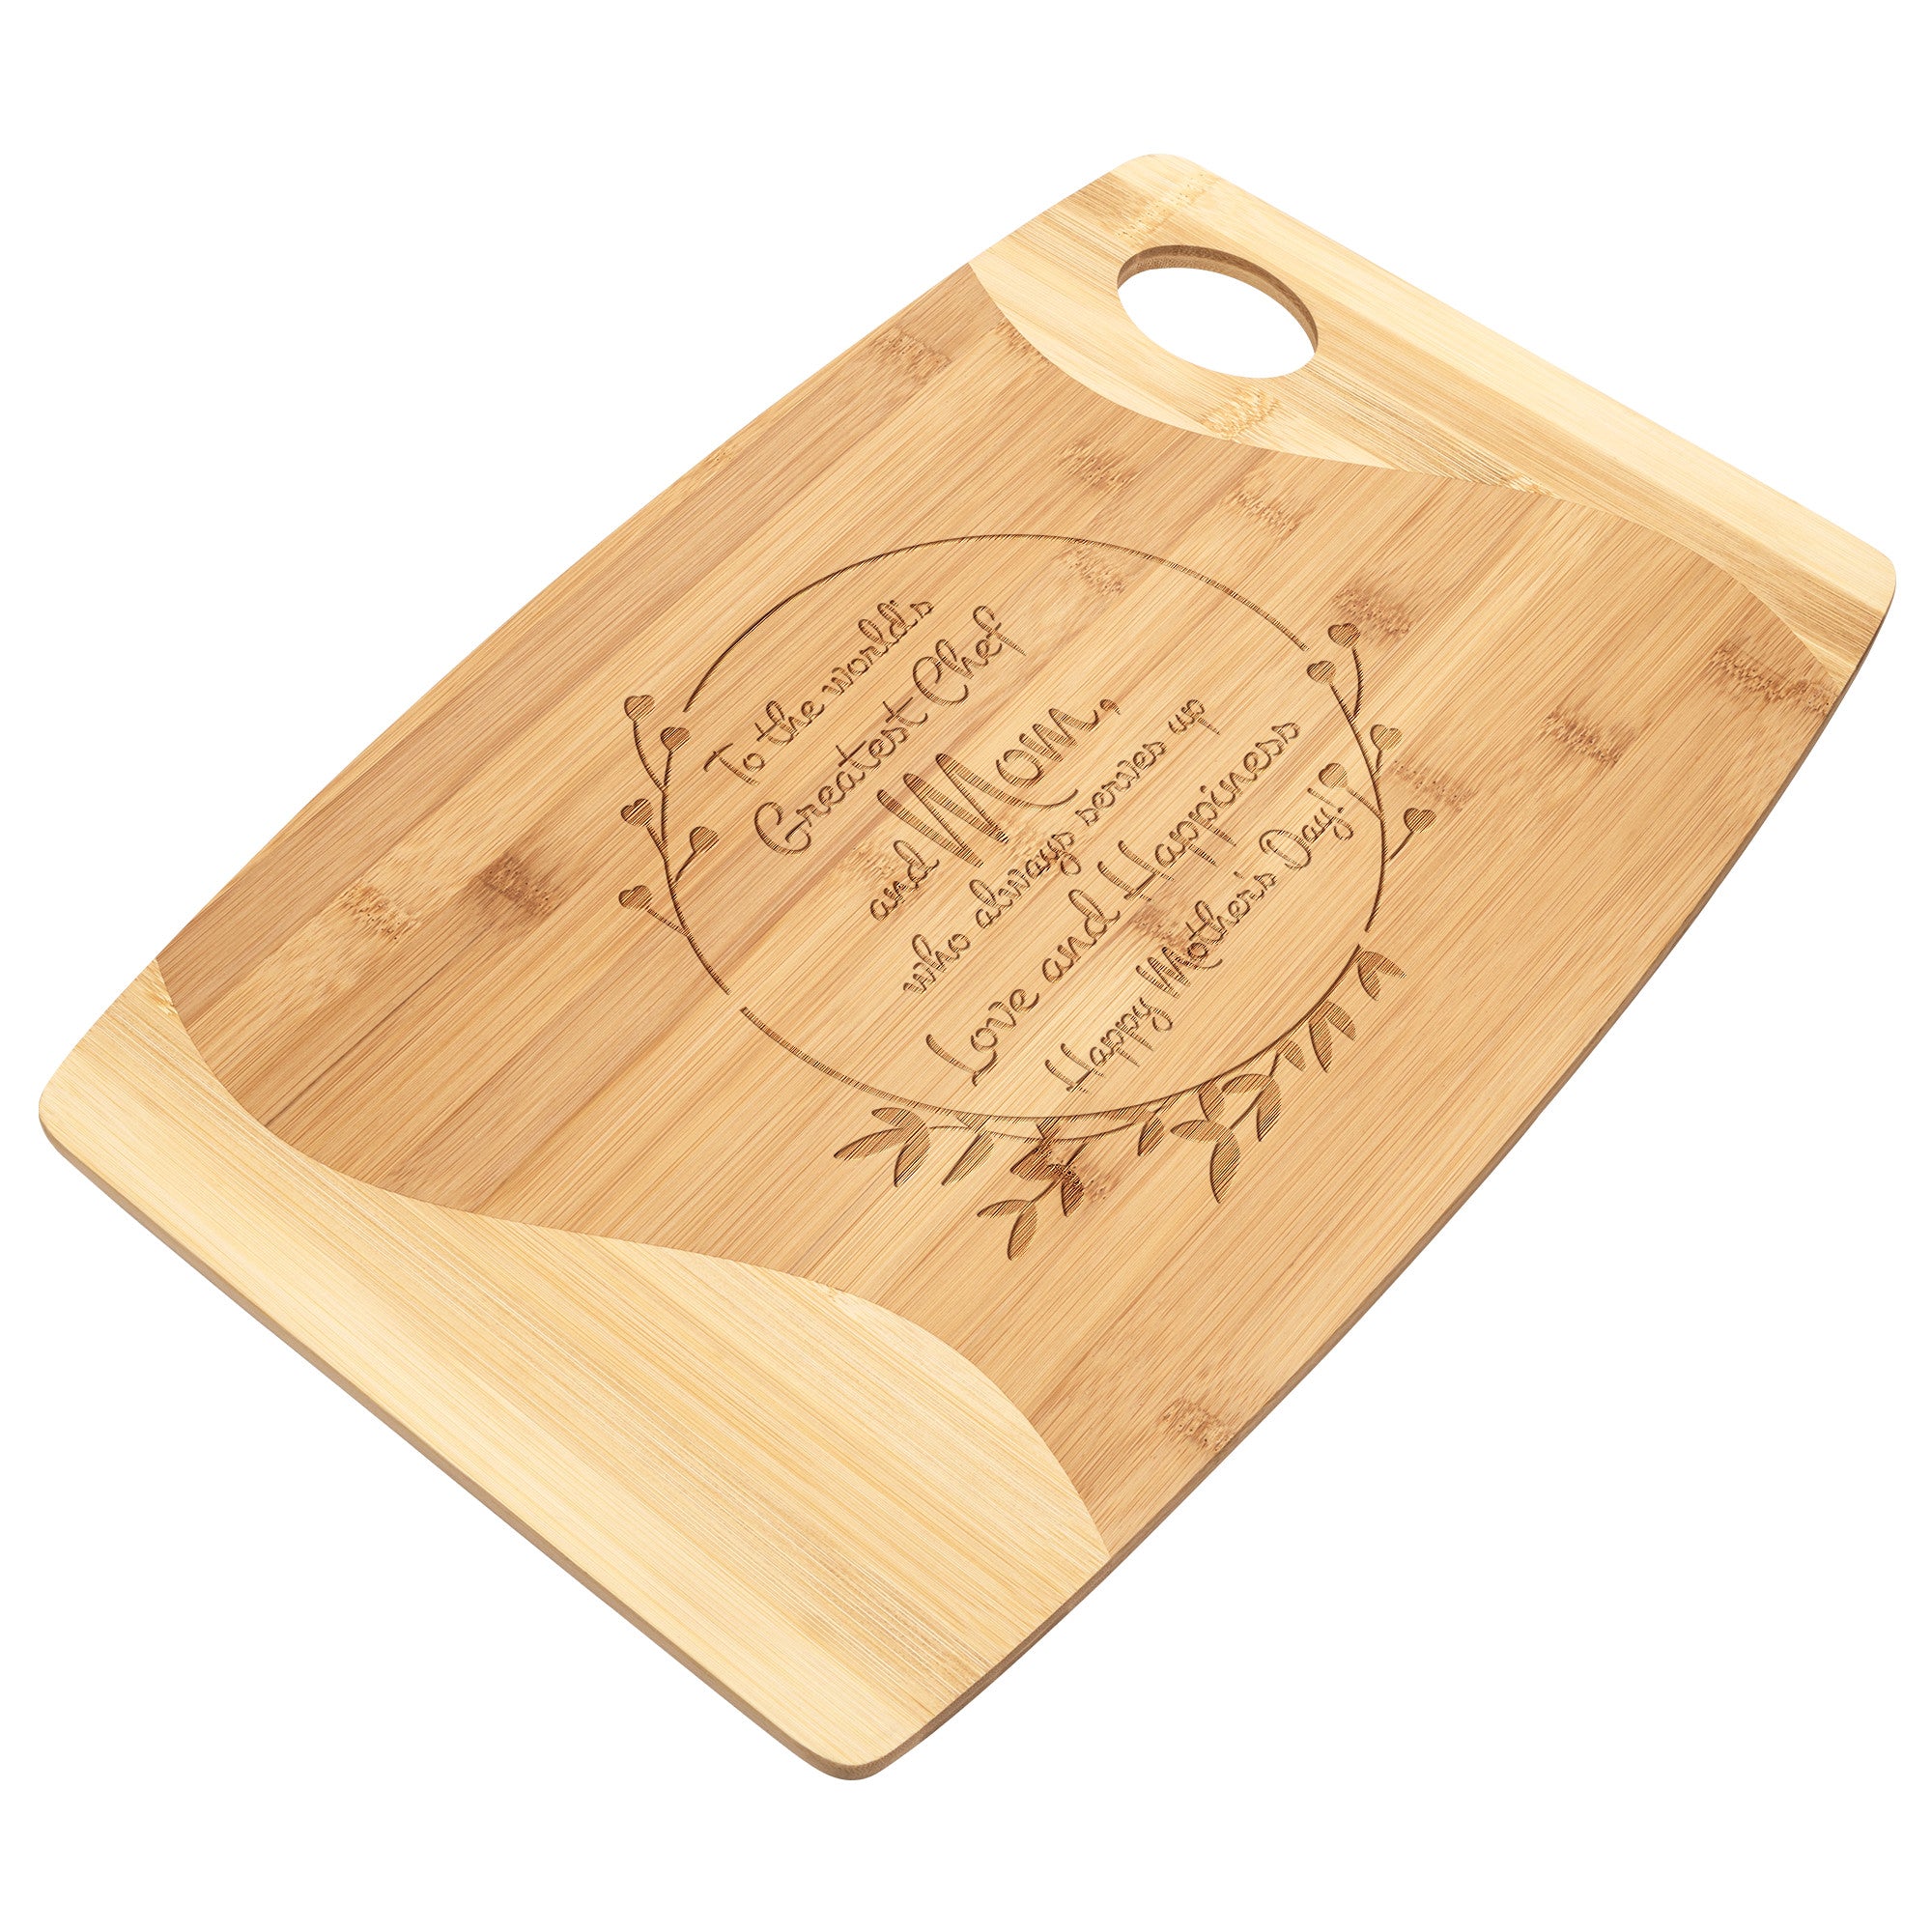 World's Greatest Chef and Mom - Cutting Board for Mother's Day